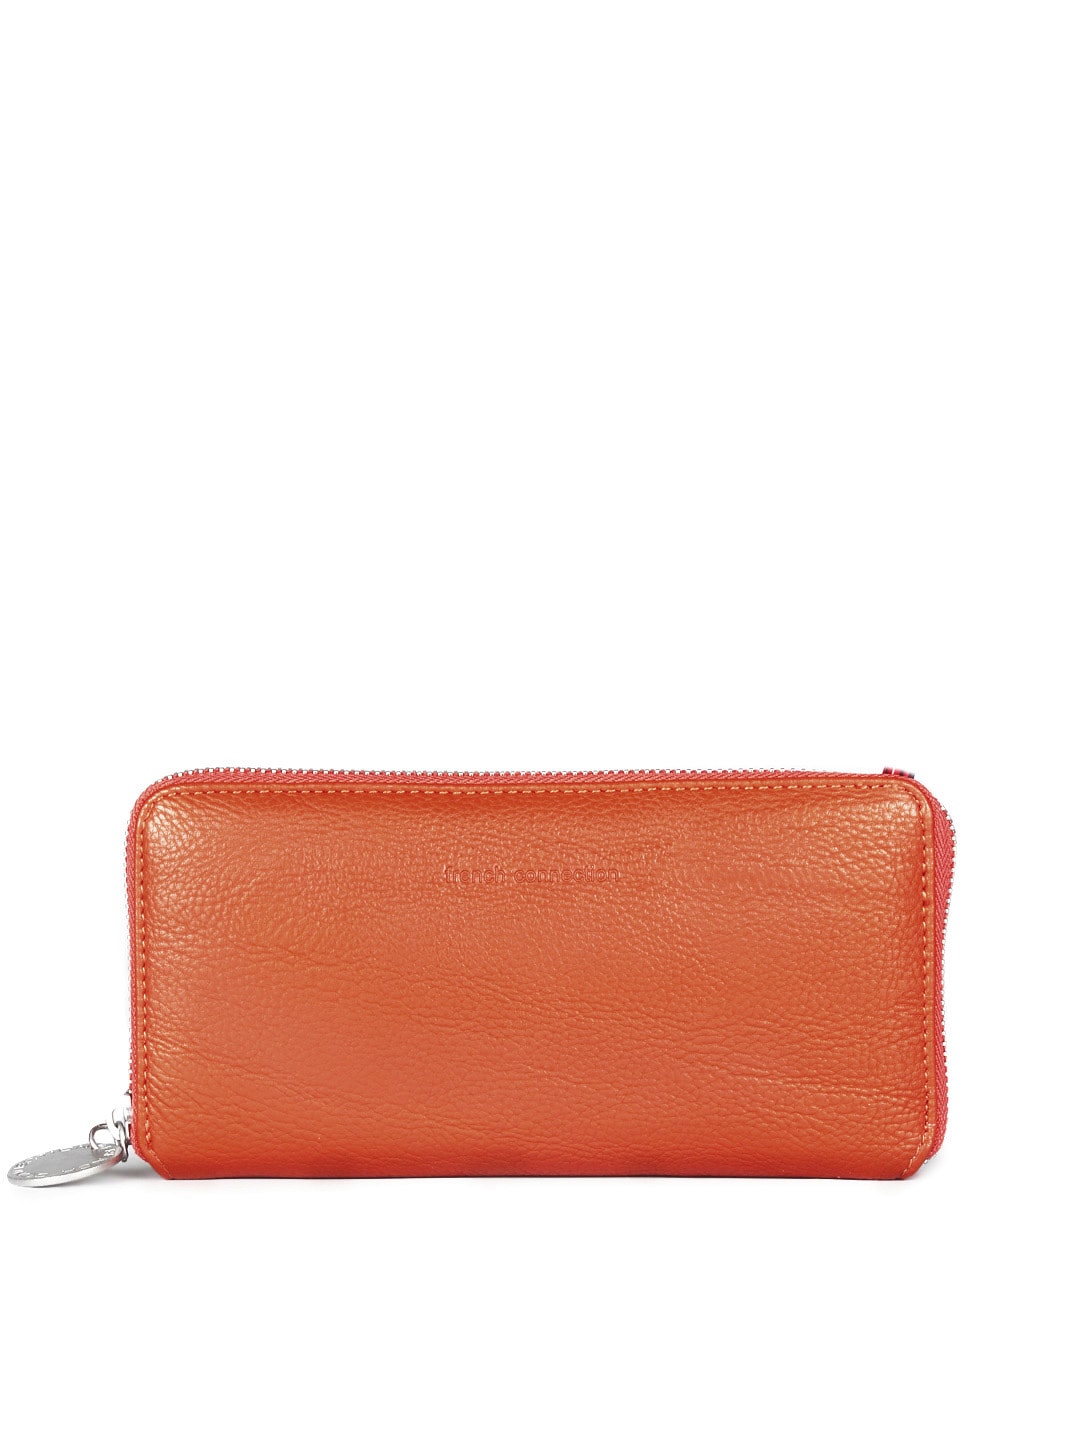 French Connection Women Orange Wallet